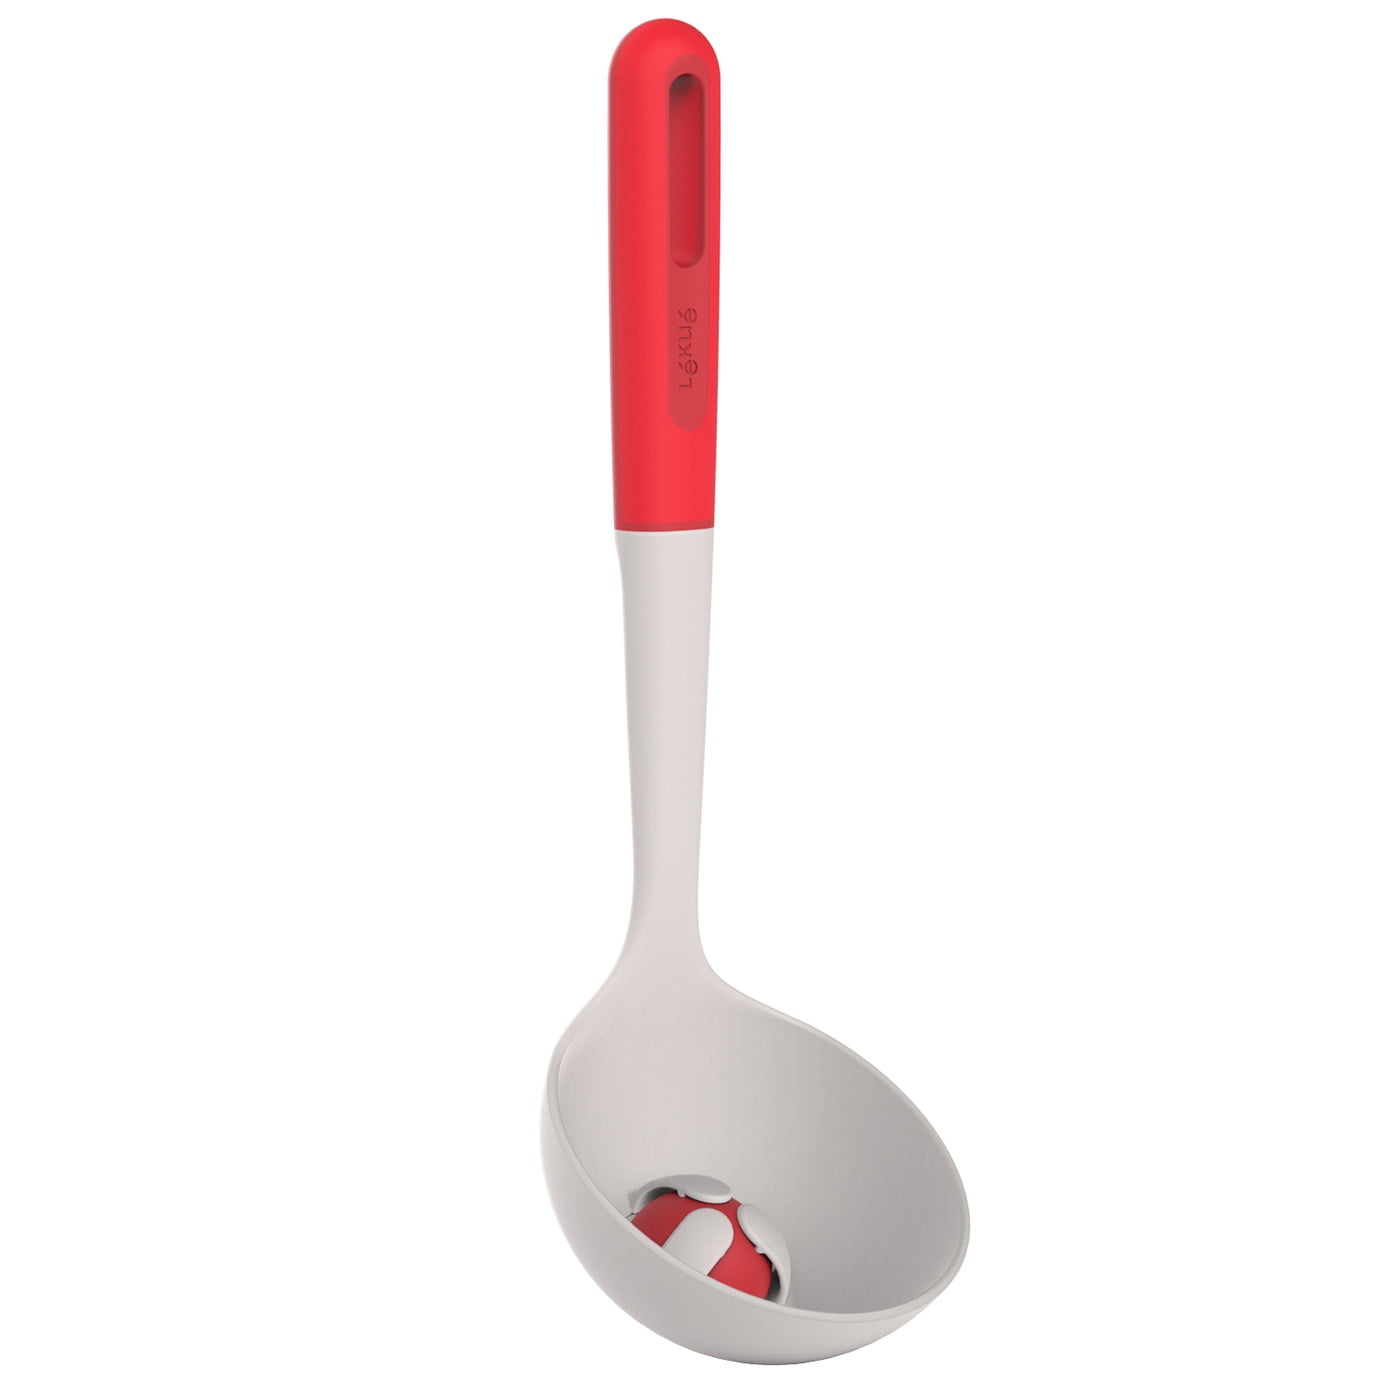 Lekue Silicone Cooking and Serving Tongs